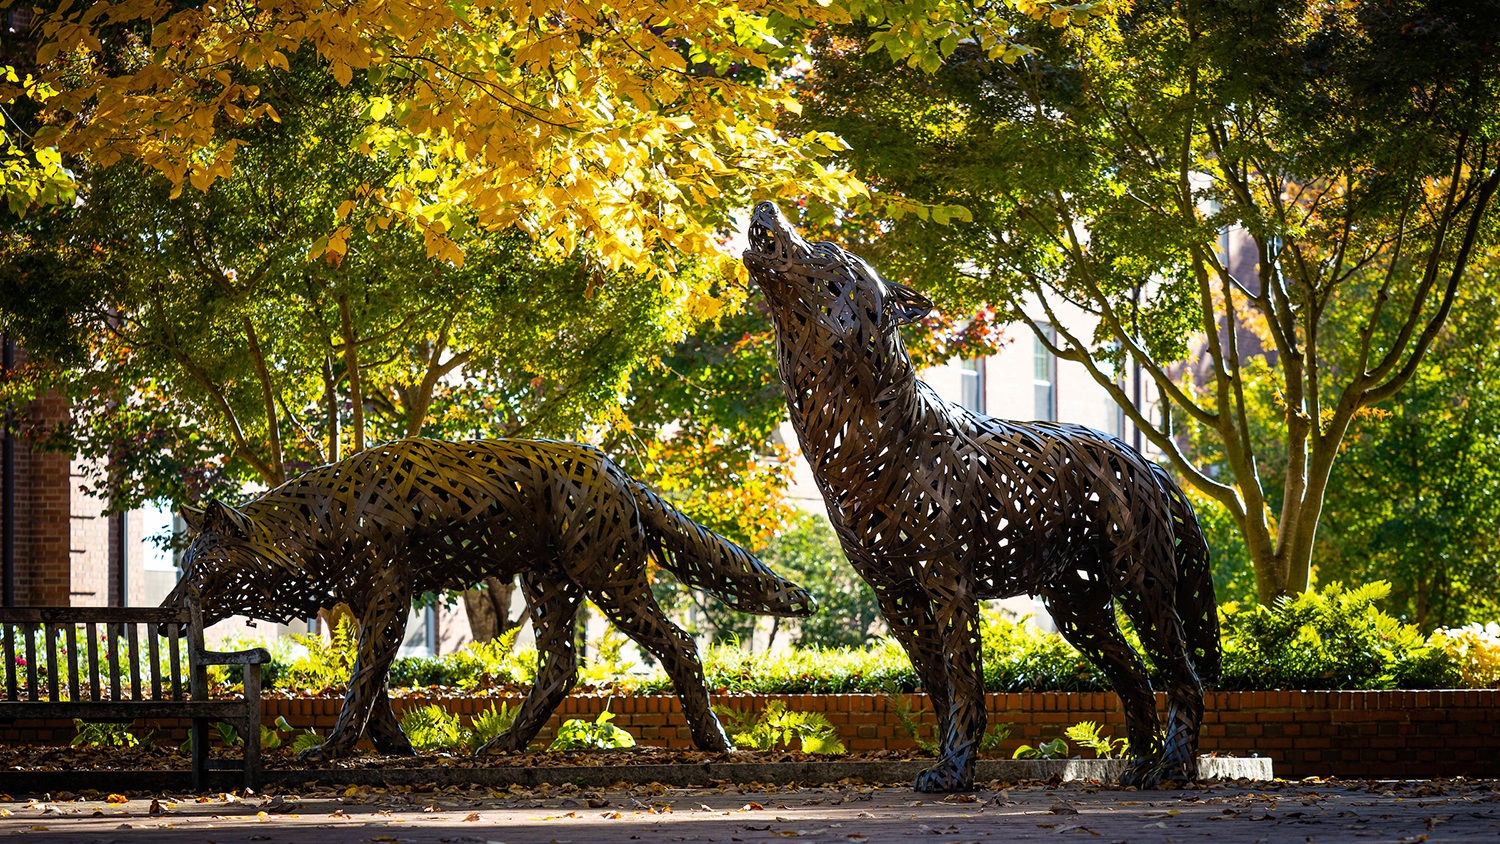 Wolf Plaza during fall. Photo by Marc Hall